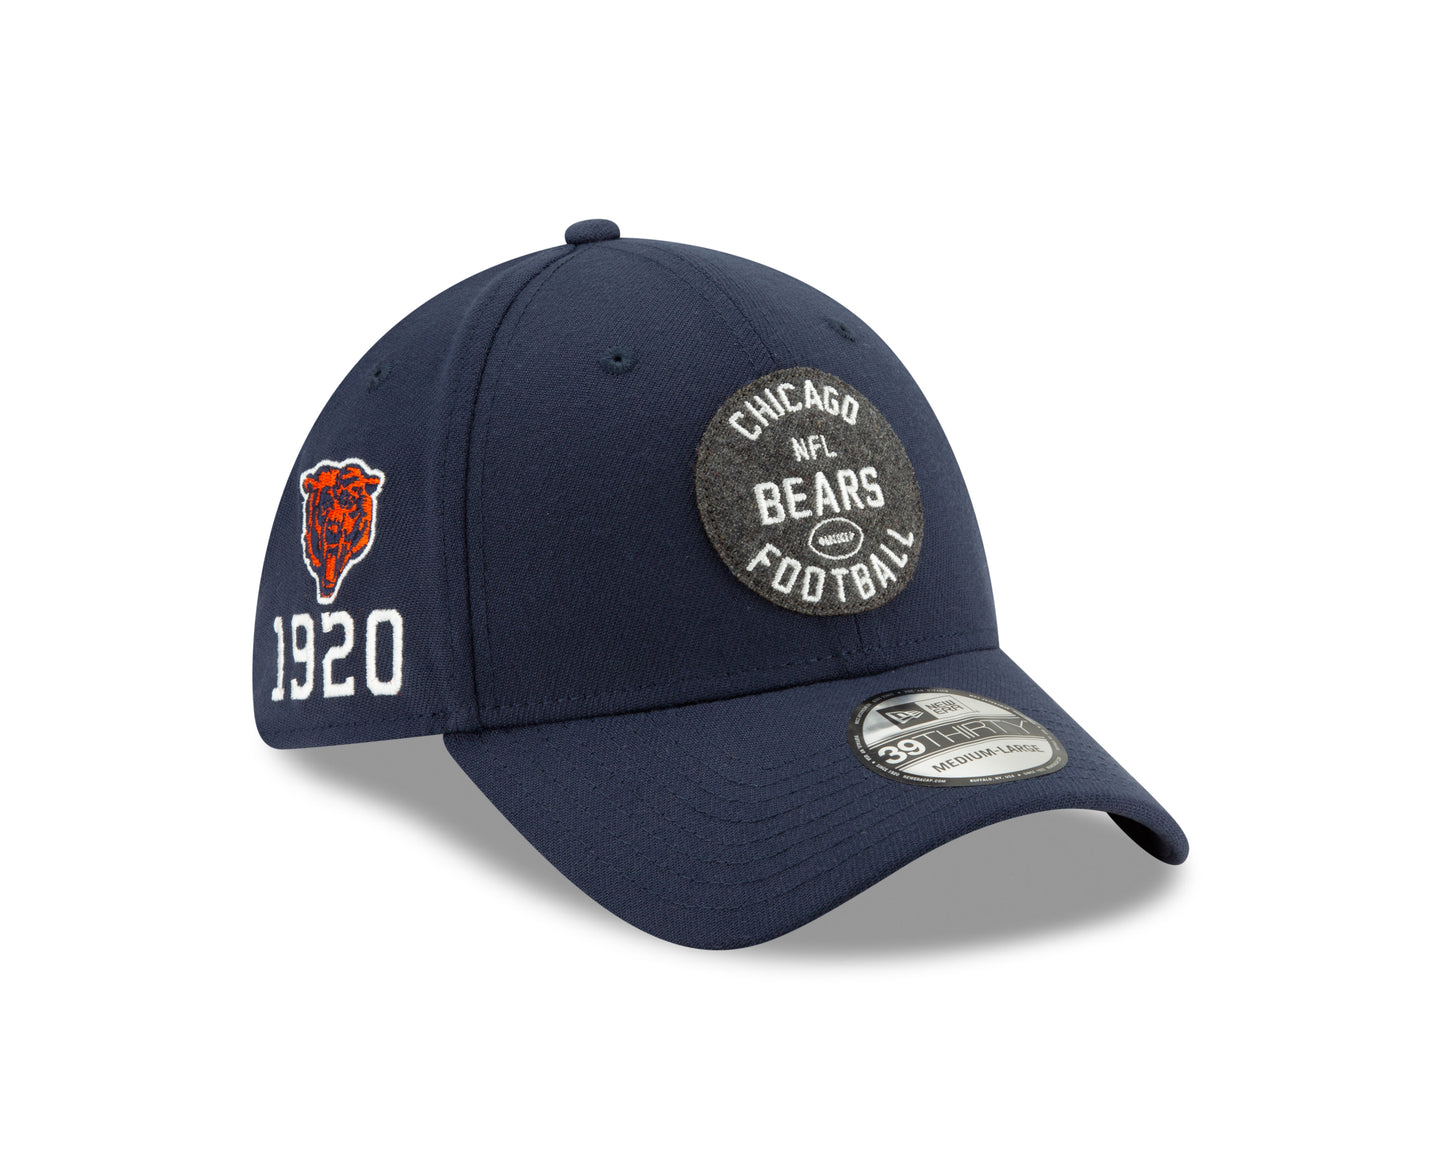 Chicago Bears 2019 Established Collection Sideline 1930 Home 39THIRTY Flex Hat